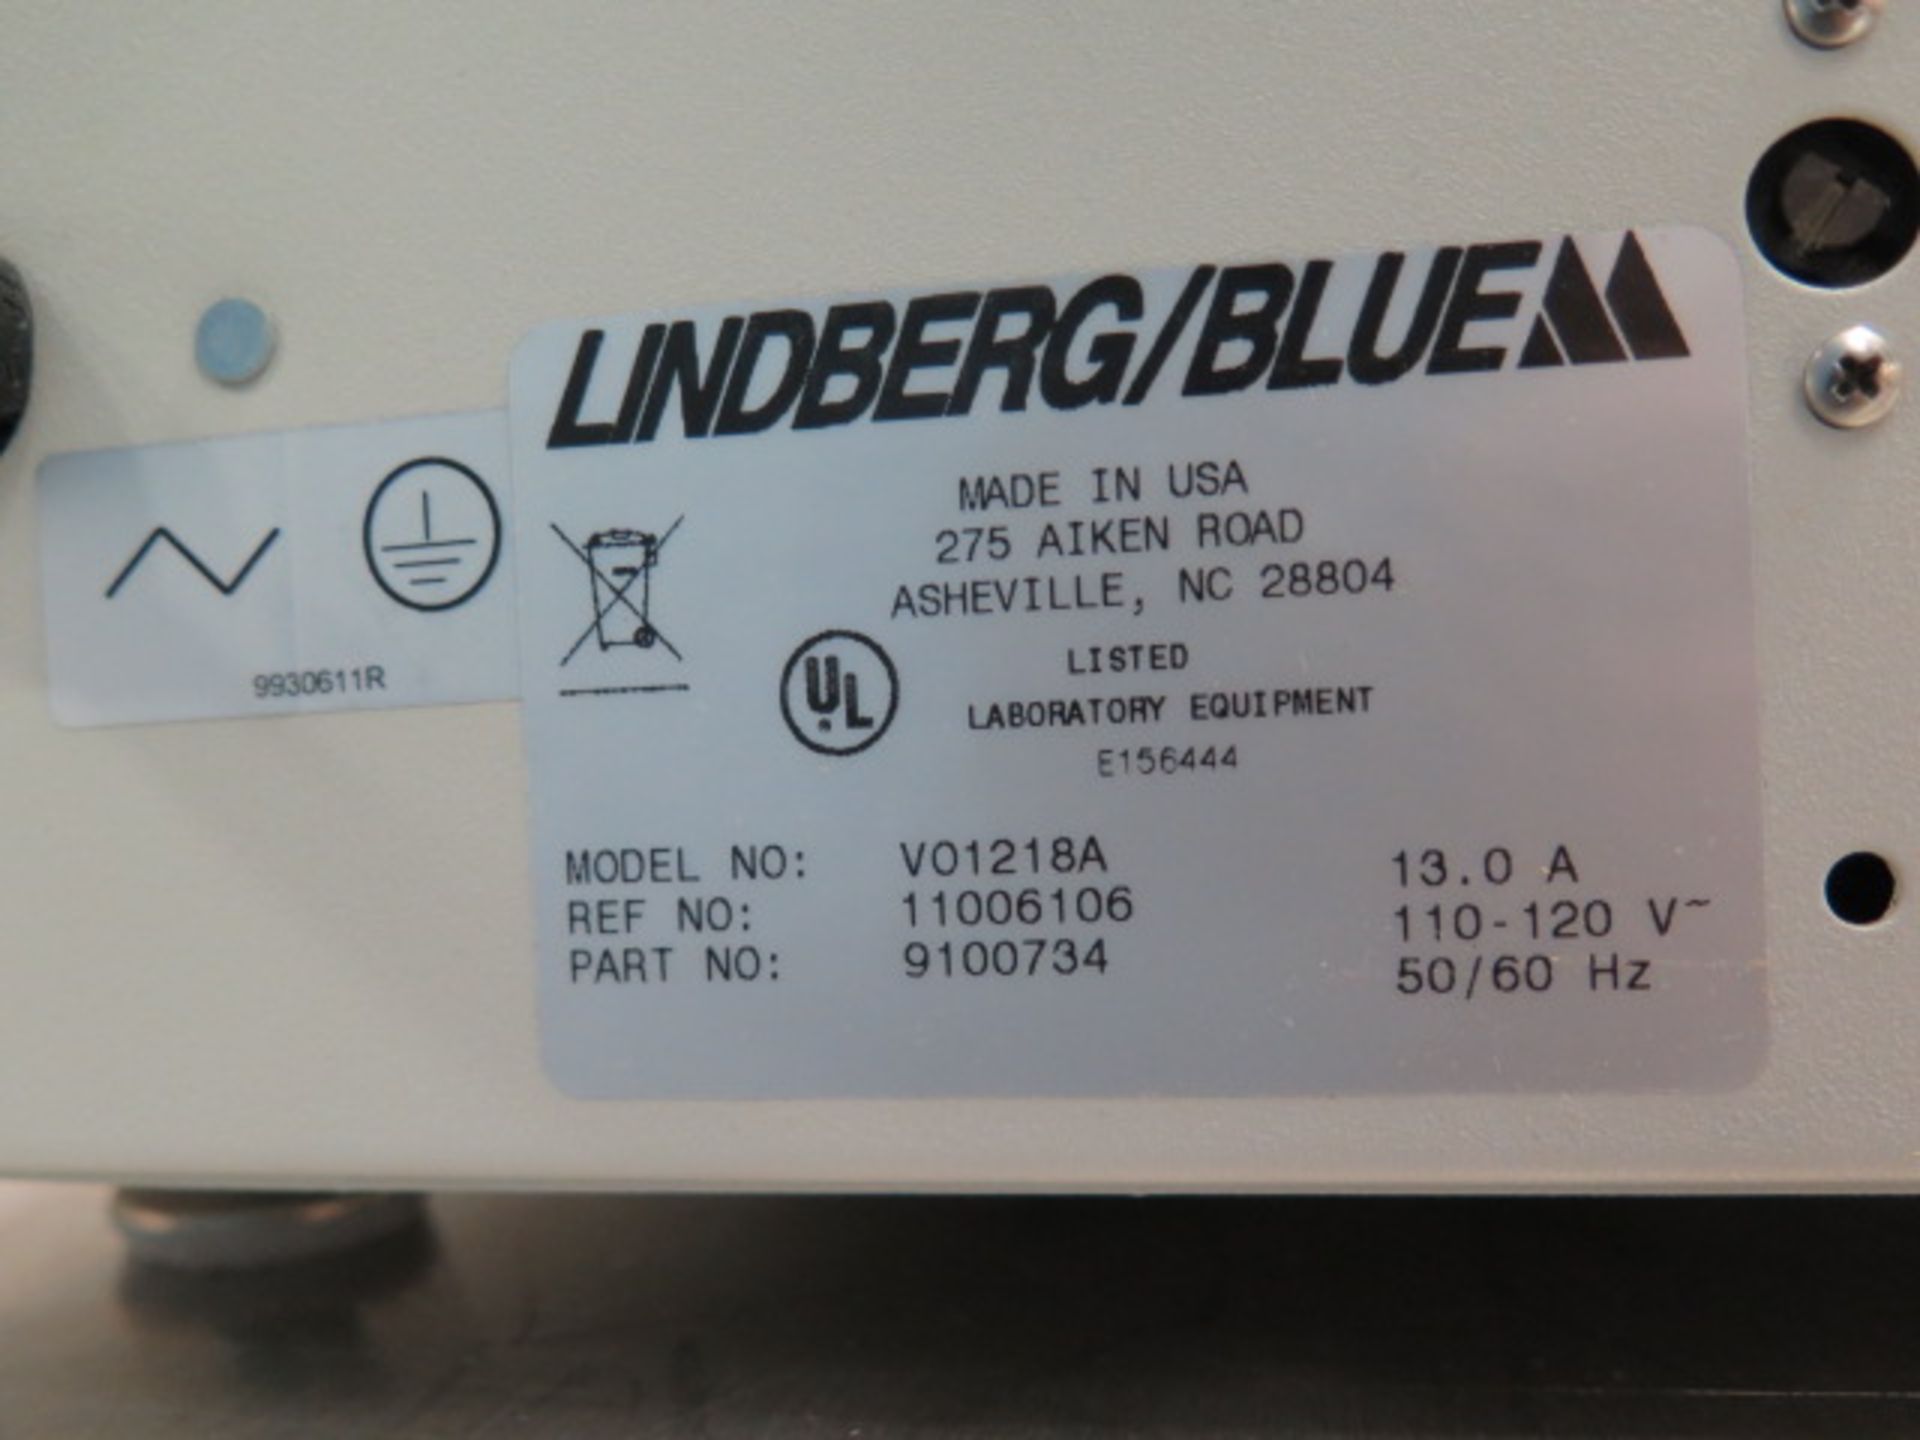 Thermo Electron Lindberg / BlueM mdl. V01218A Vacuum Oven s/n 9100734 (SOLD AS-IS - NO WARRANTY) - Image 10 of 10